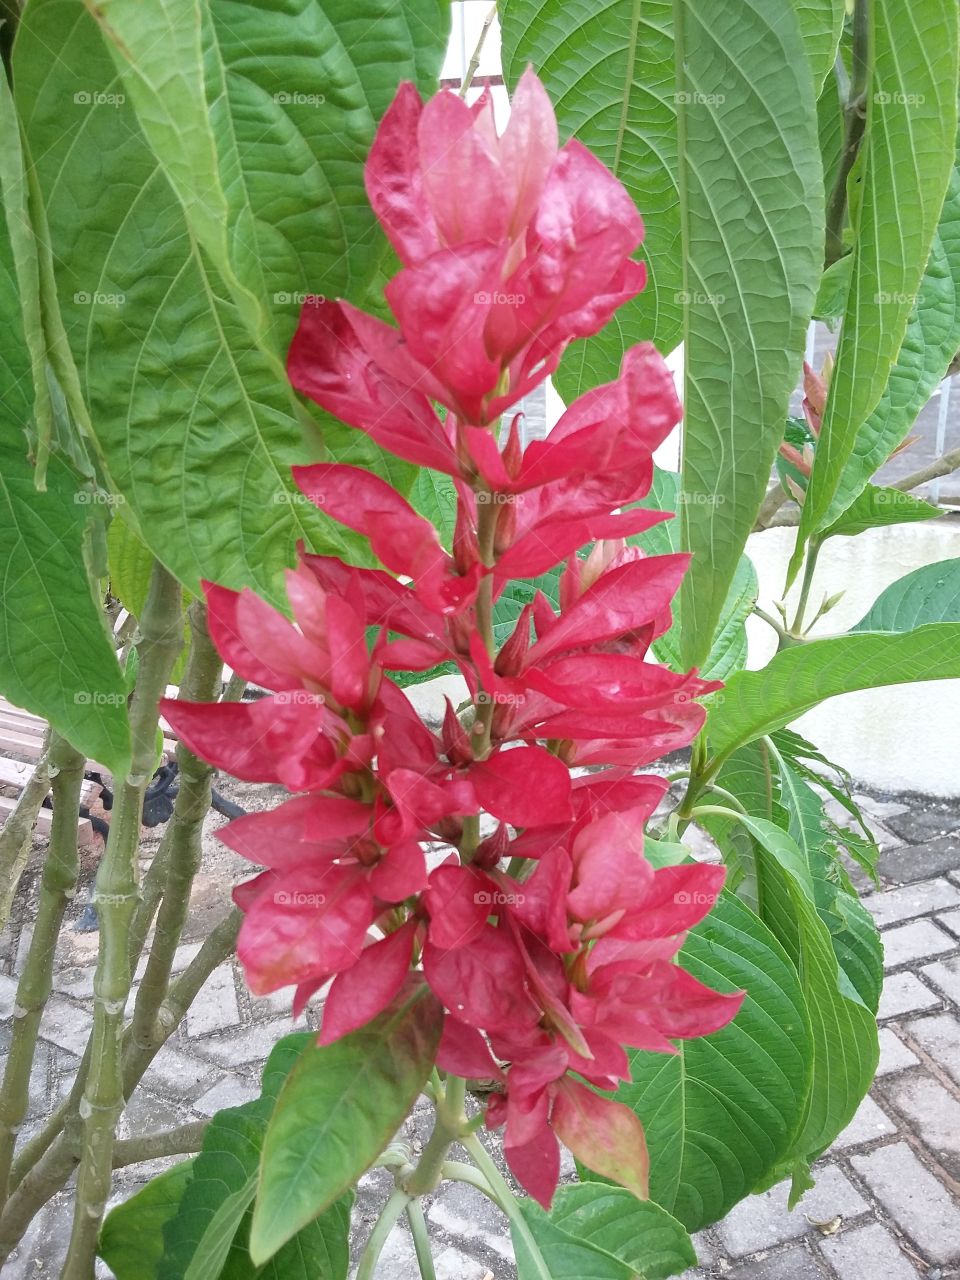 Typical flower from northeastern Brazil.